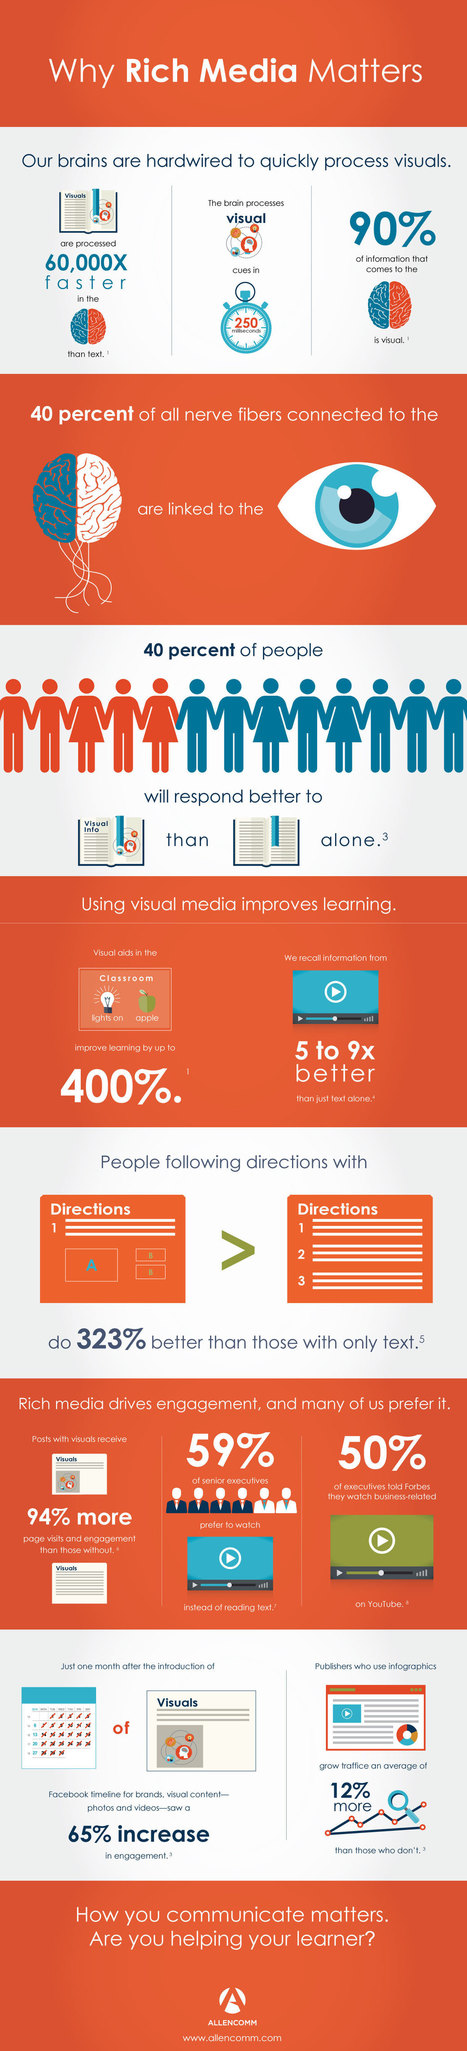 Boosting Learner Engagement with Rich Media Infographic | Infographic | Distance Learning, mLearning, Digital Education, Technology | Scoop.it